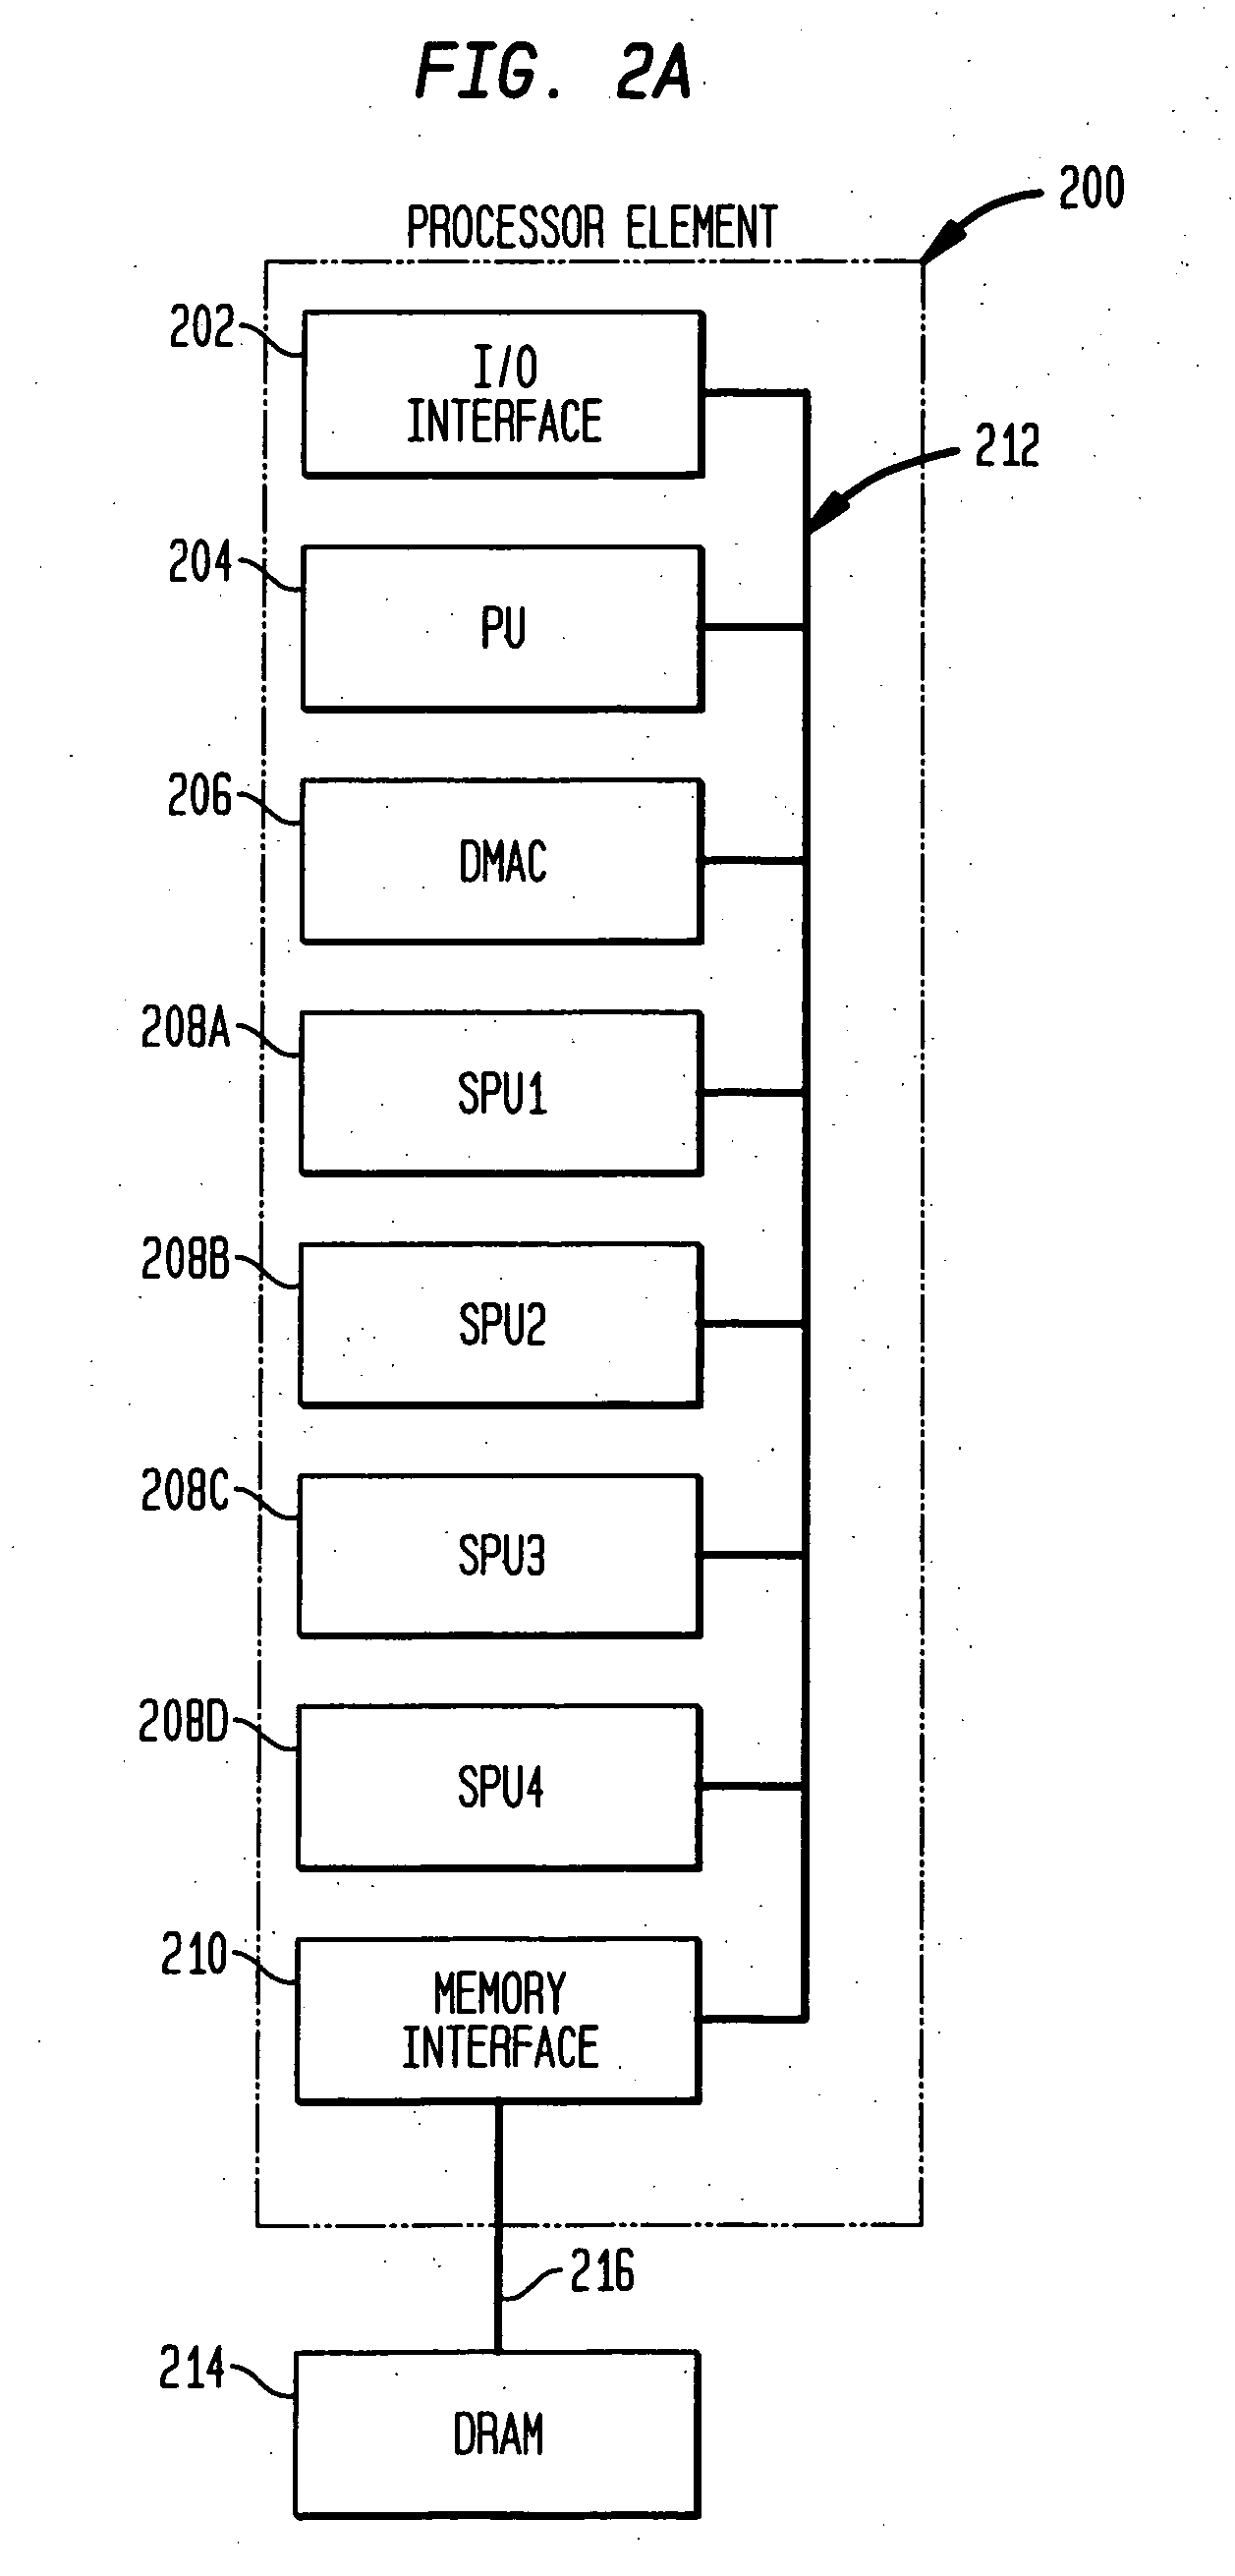 Methods and apparatus for emulating software applications